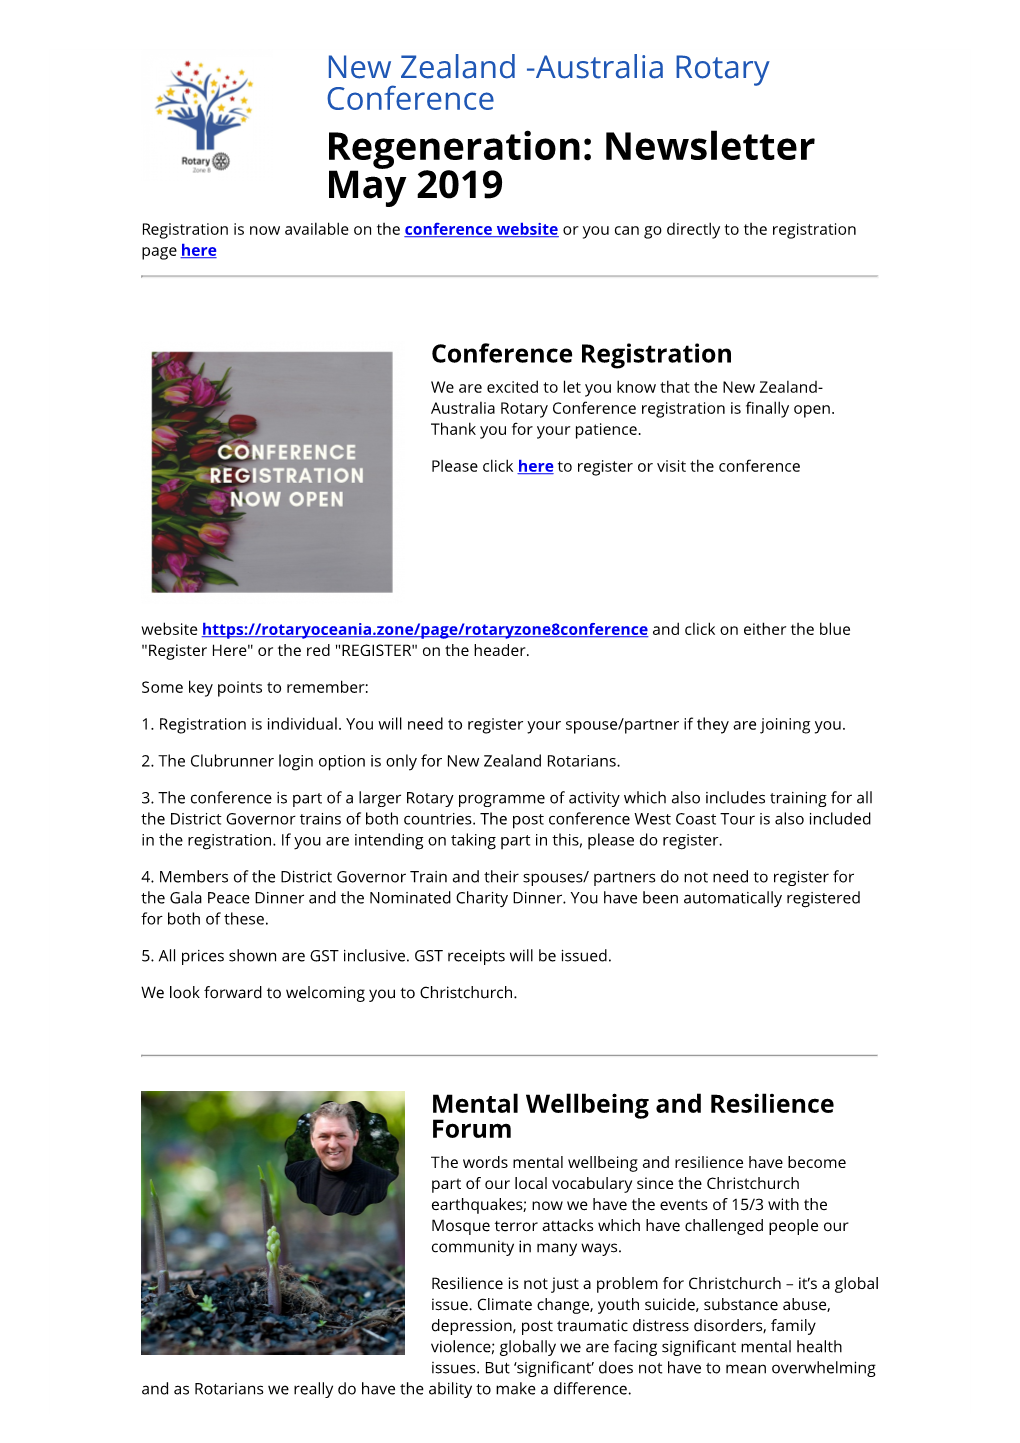 Regeneration: Newsletter May 2019 Registration Is Now Available on the Conference Website Or You Can Go Directly to the Registration Page Here